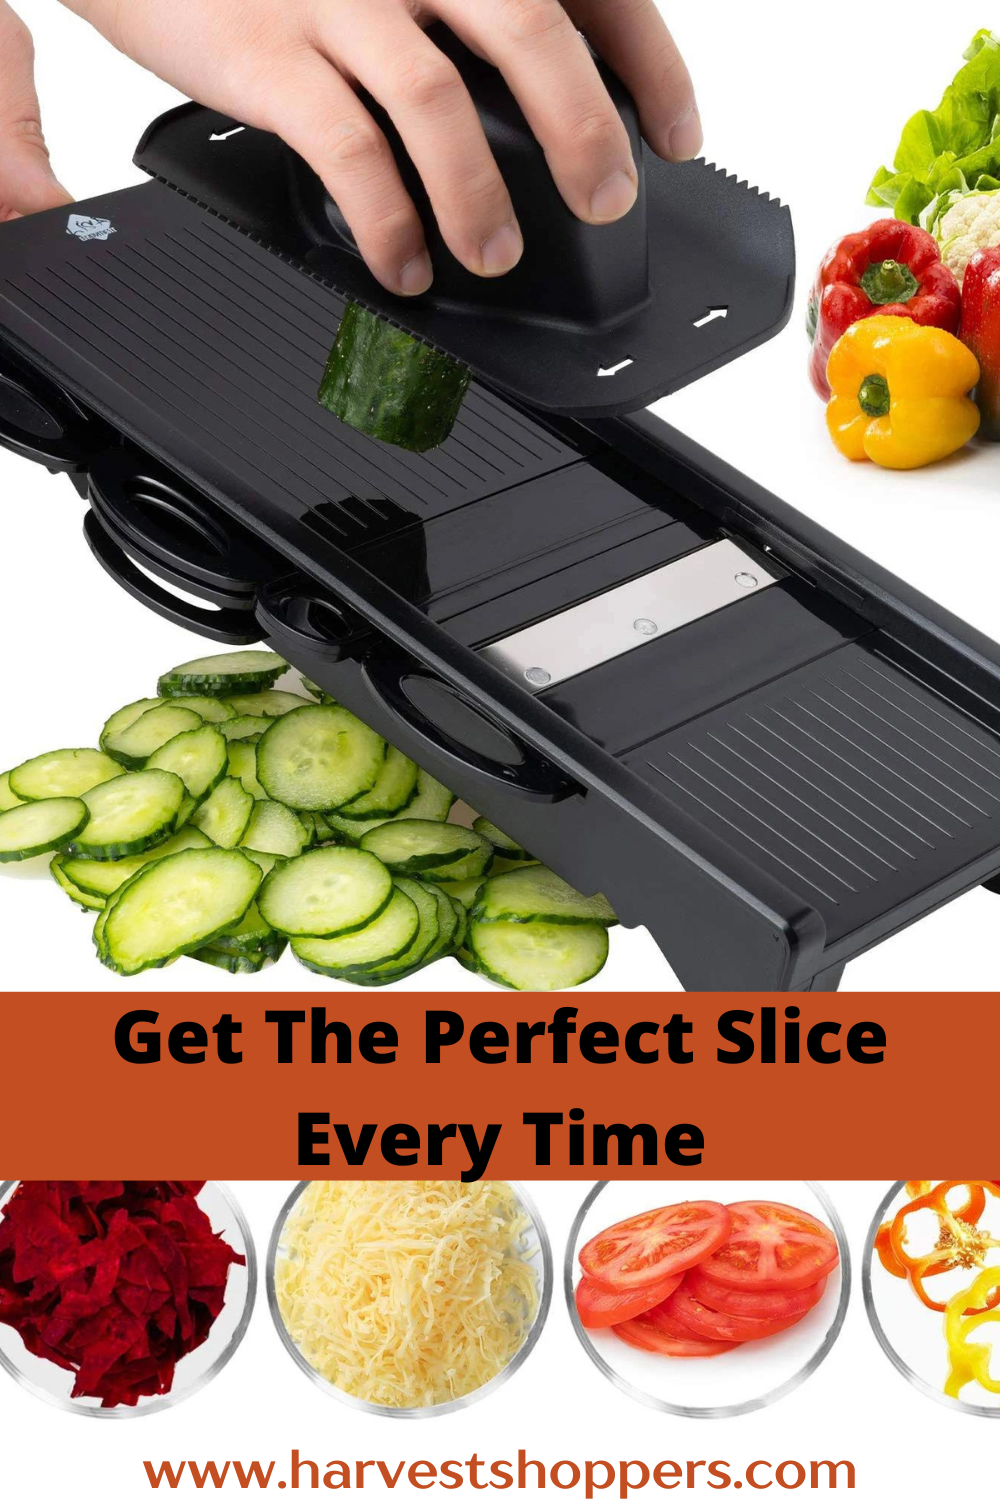 Best 18 Kitchen Slicers And Choppers